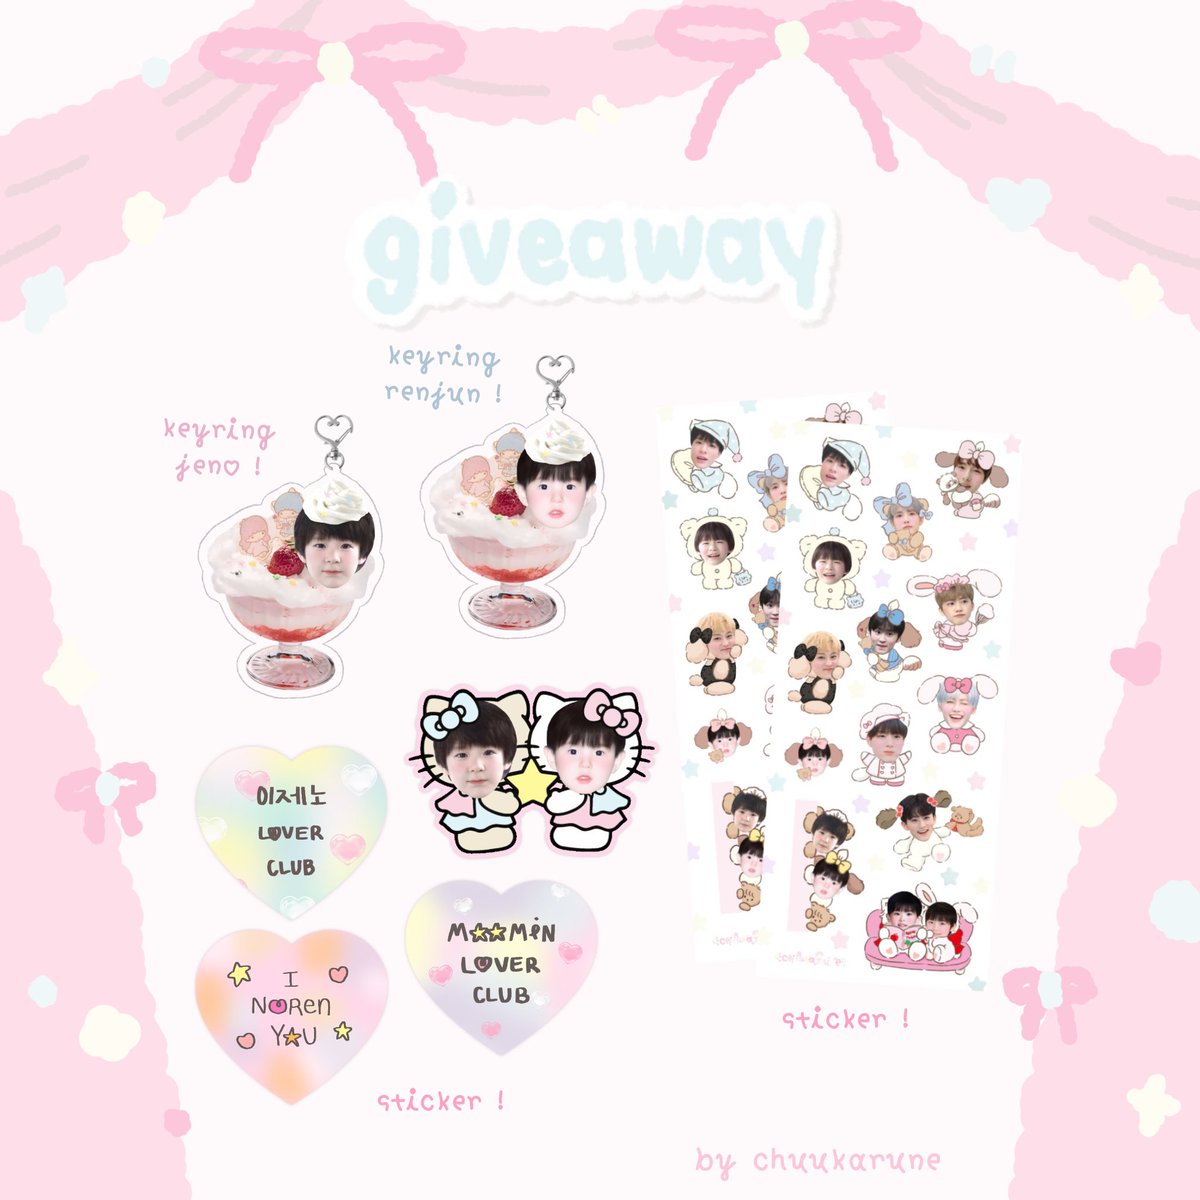 pls kindly rt
⠀⠀⠀giveaway ౨ৎ THEDREAMSHOW3 💚

𓇼 keyring acrylic ( jeno,renjun ) 20 ea.
𓇼 sticker 50 ea.
𓇼 sticker dicut 50%

♡ date 23 June 2024 ♡ time tba ♡

𓐄 more details in mention 𓐄

🐯🦊🐶🐻🐰🐱🐹

 #NCTDREAM_THEDREAMSHOW3inBKK 
#NCTDREAM_THEDREAMSHOW3